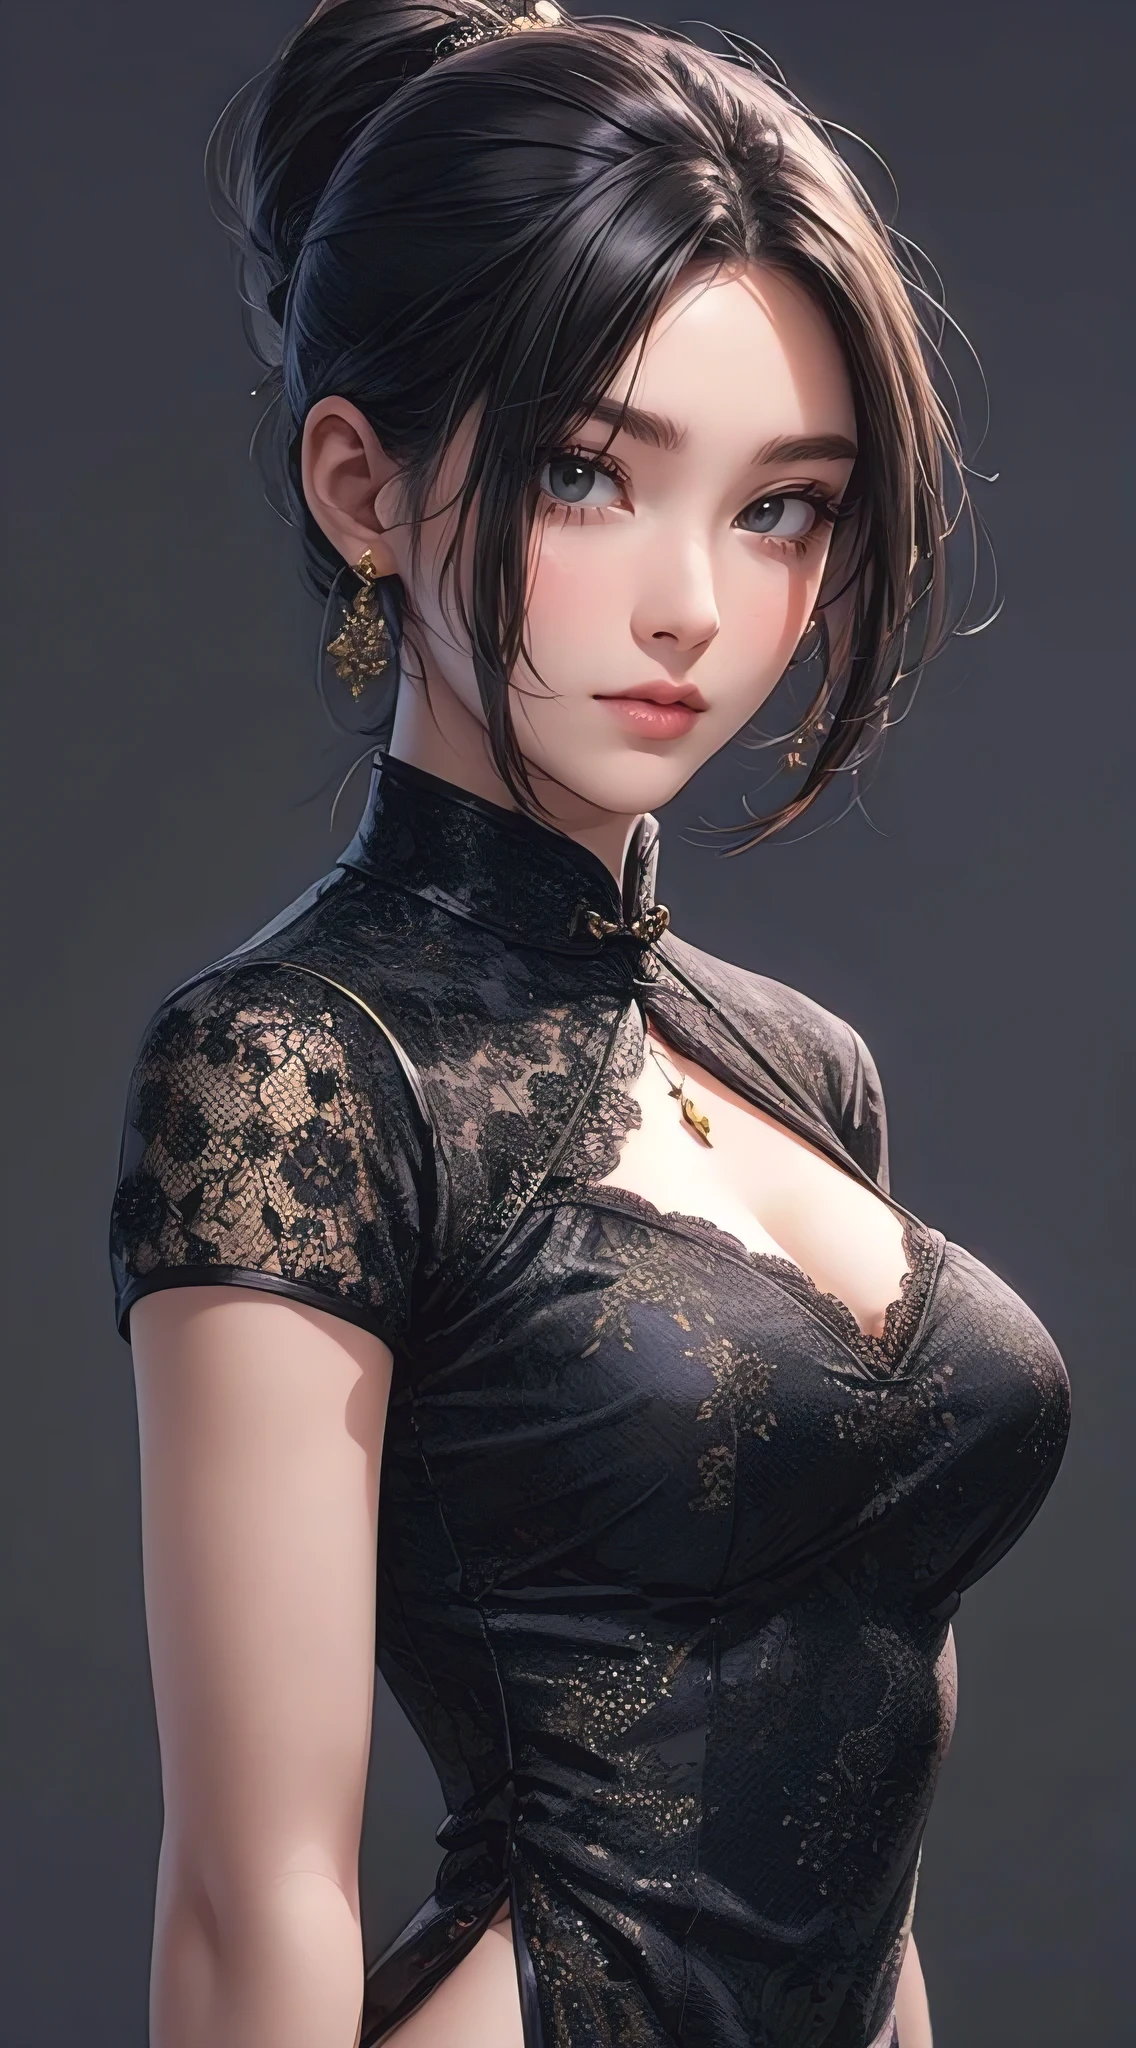 beautiful, perfect body proportions, curvaceous, busty, slim, black lace cheongsam with gold linings, high ponytail, photorealistic